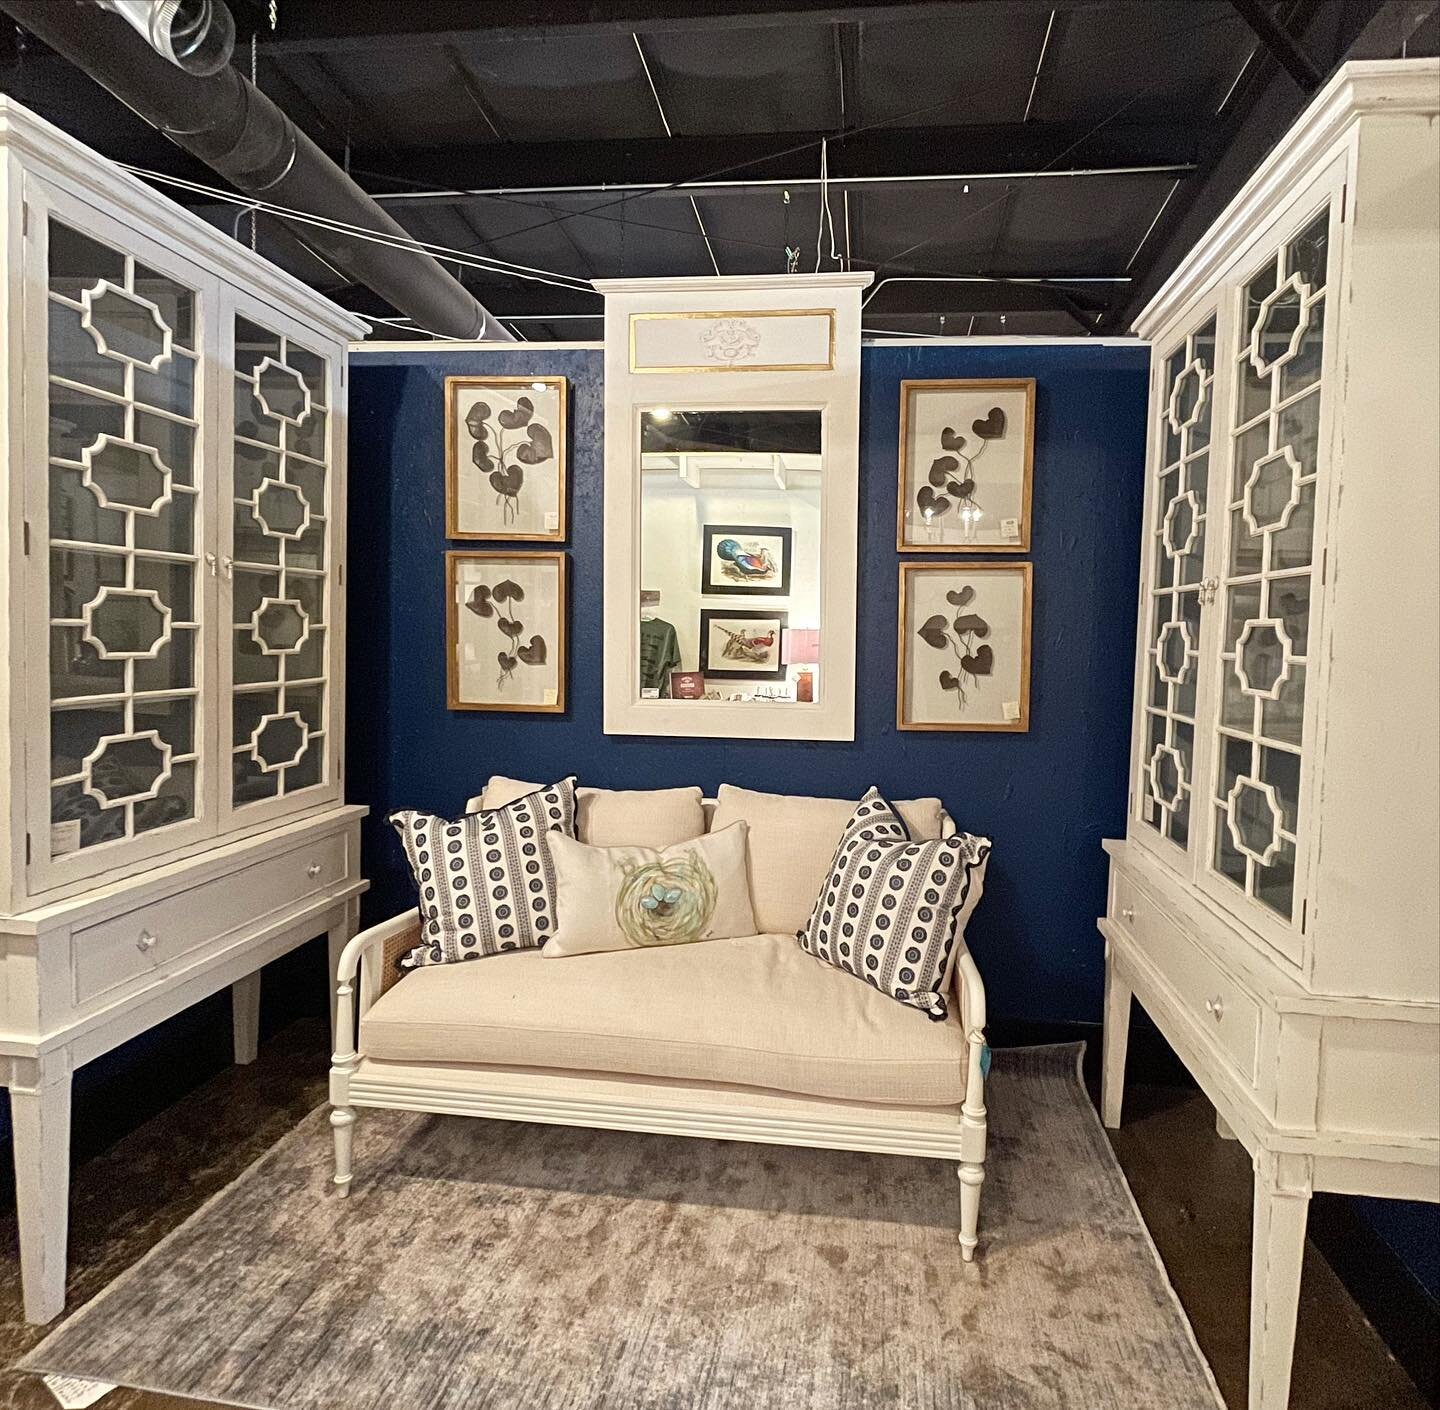 We love redecorating our showrooms! It&rsquo;s always a little different each time. Come check out our new furniture! 

We are open until 5pm #shoplocal